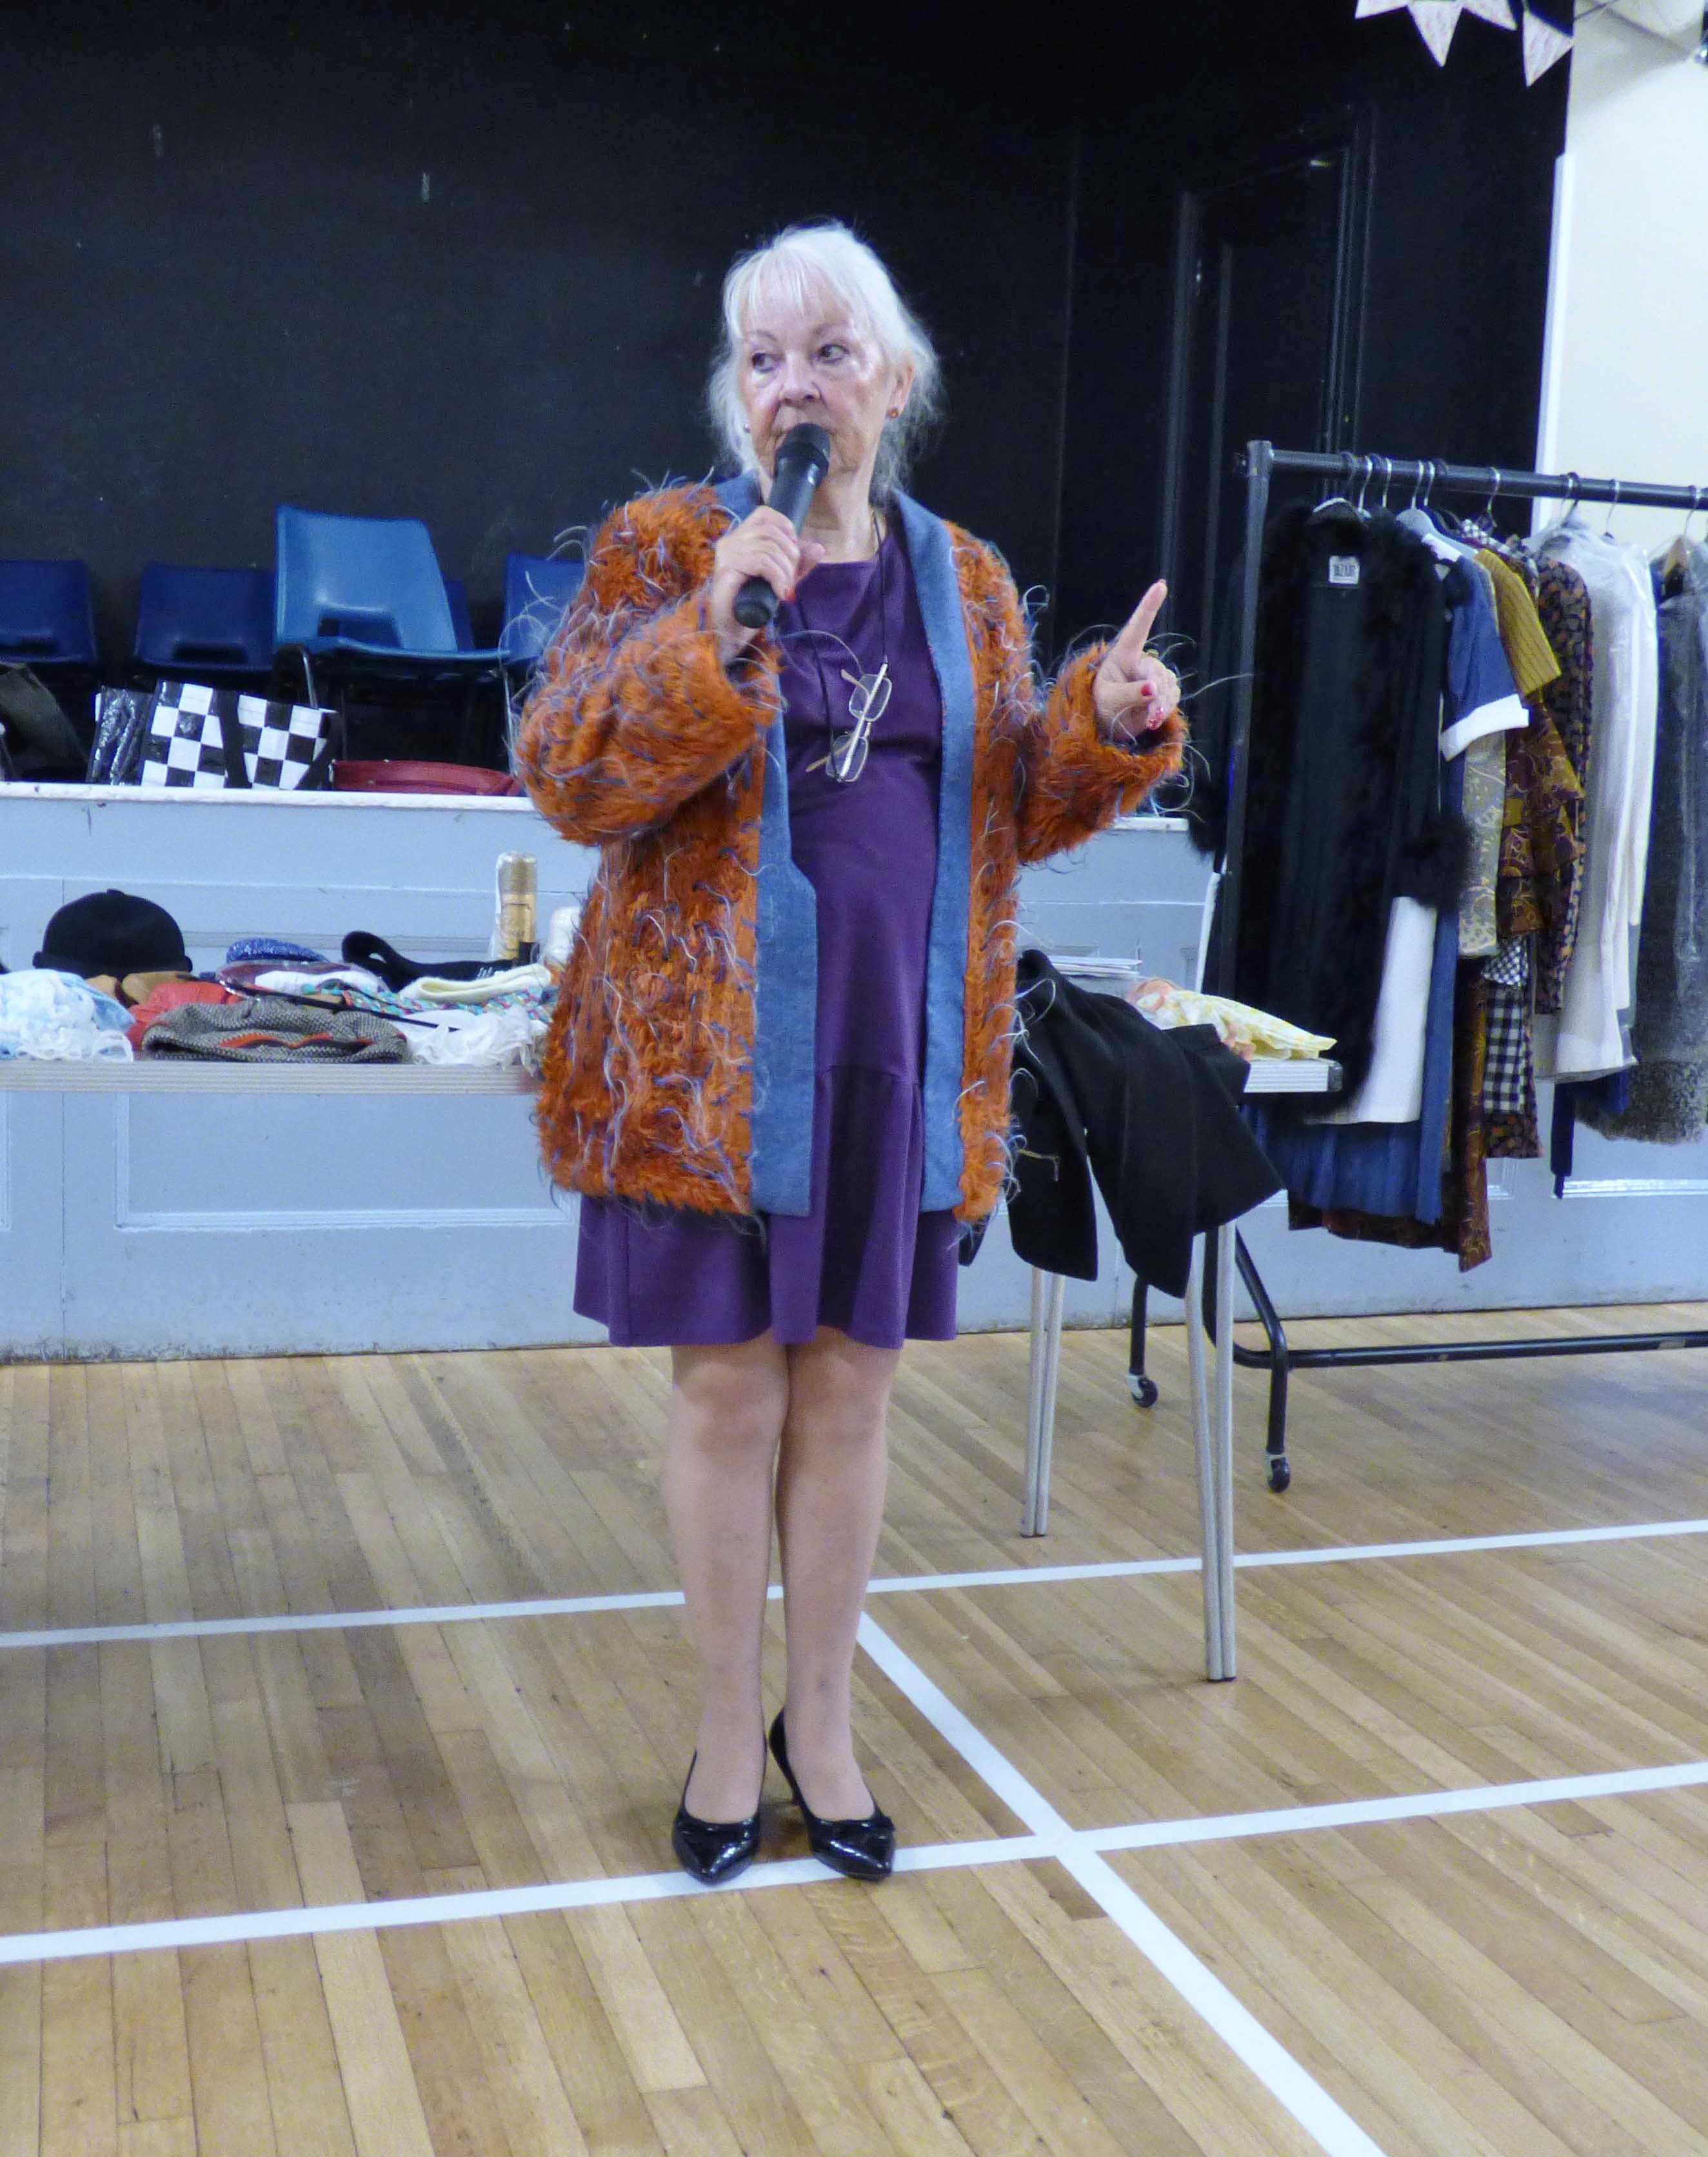 Ruth Lowe wearing a jacket designed by Mary Quant and previously worn by John Lennon at "Mary Quant Talk" by Ruth Lowe, 2022